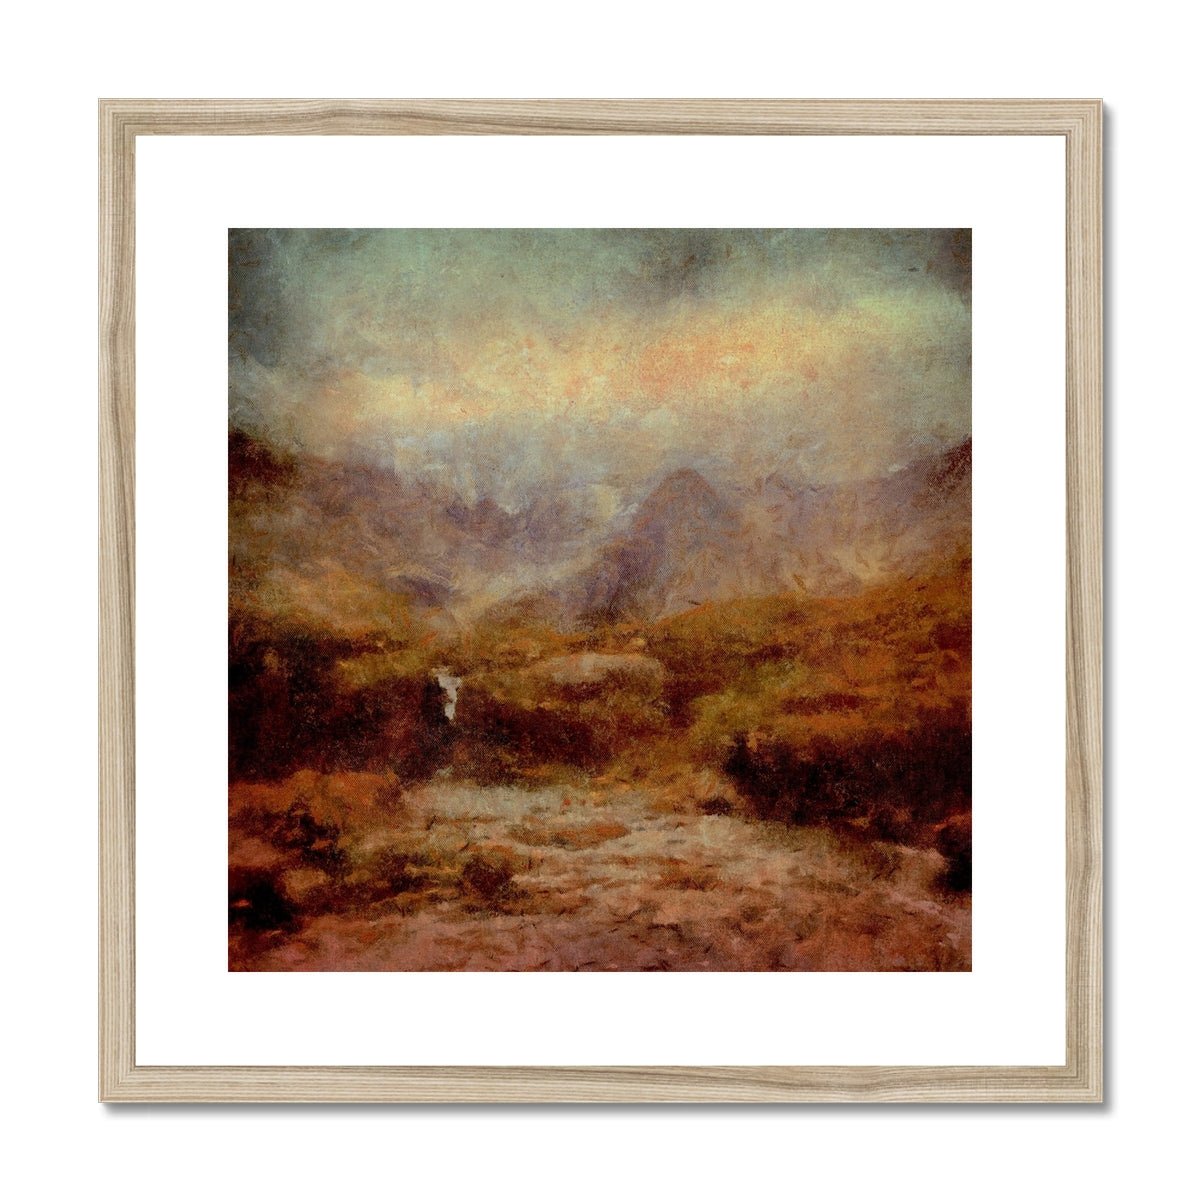 The Brooding Fairy Pools Skye Painting | Framed & Mounted Prints From Scotland-Framed & Mounted Prints-Skye Art Gallery-20"x20"-Natural Frame-Paintings, Prints, Homeware, Art Gifts From Scotland By Scottish Artist Kevin Hunter